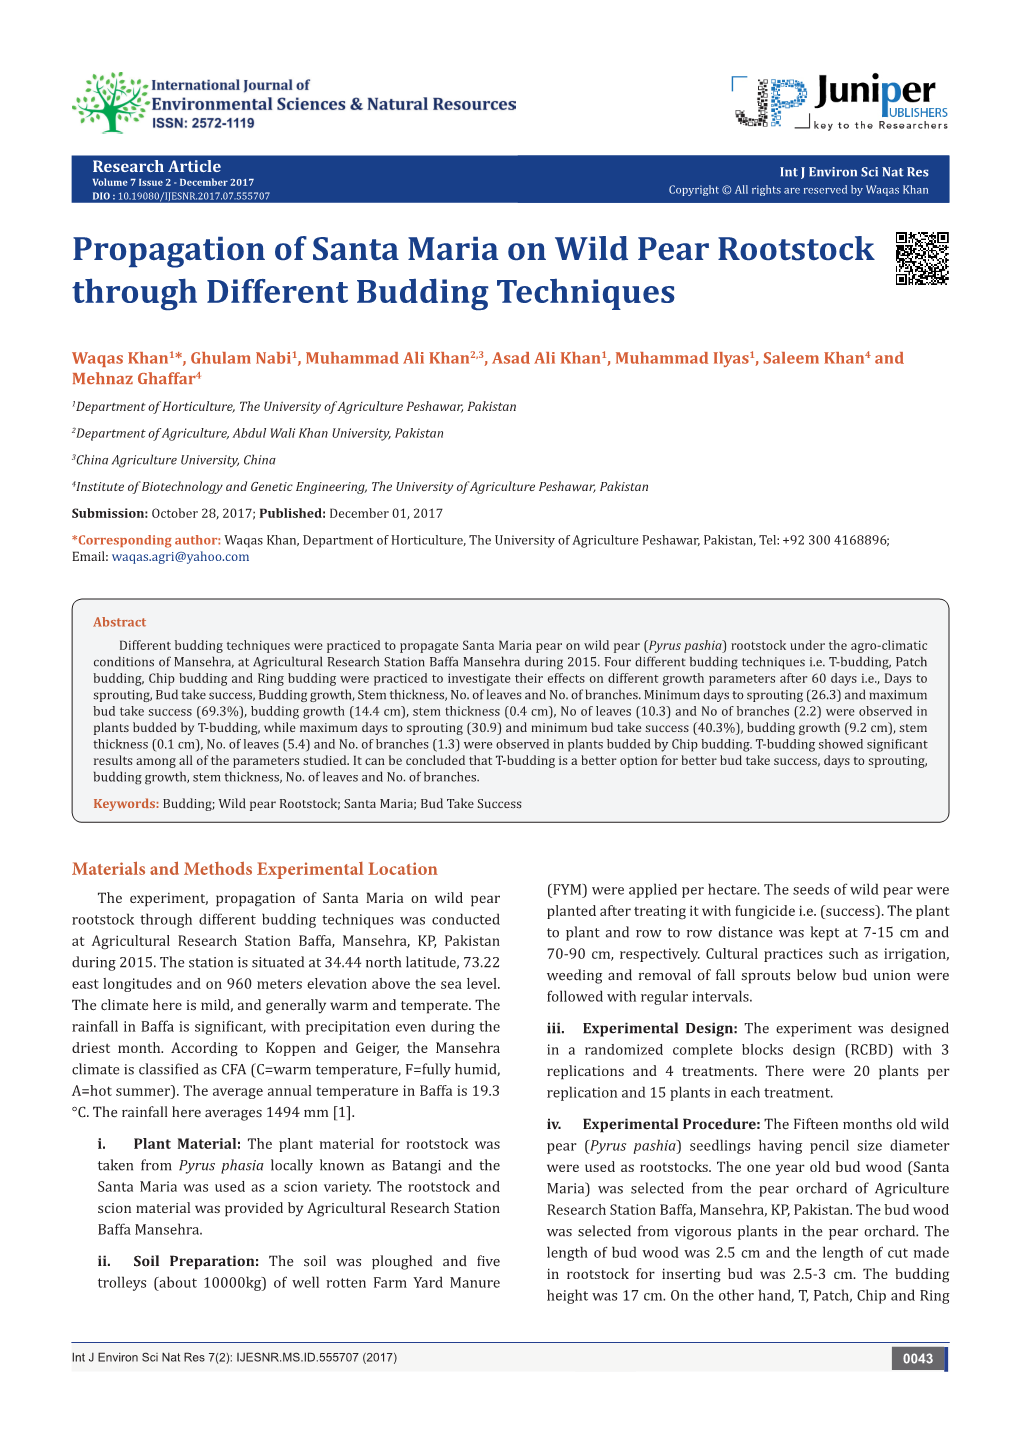 Propagation of Santa Maria on Wild Pear Rootstock Through Different Budding Techniques